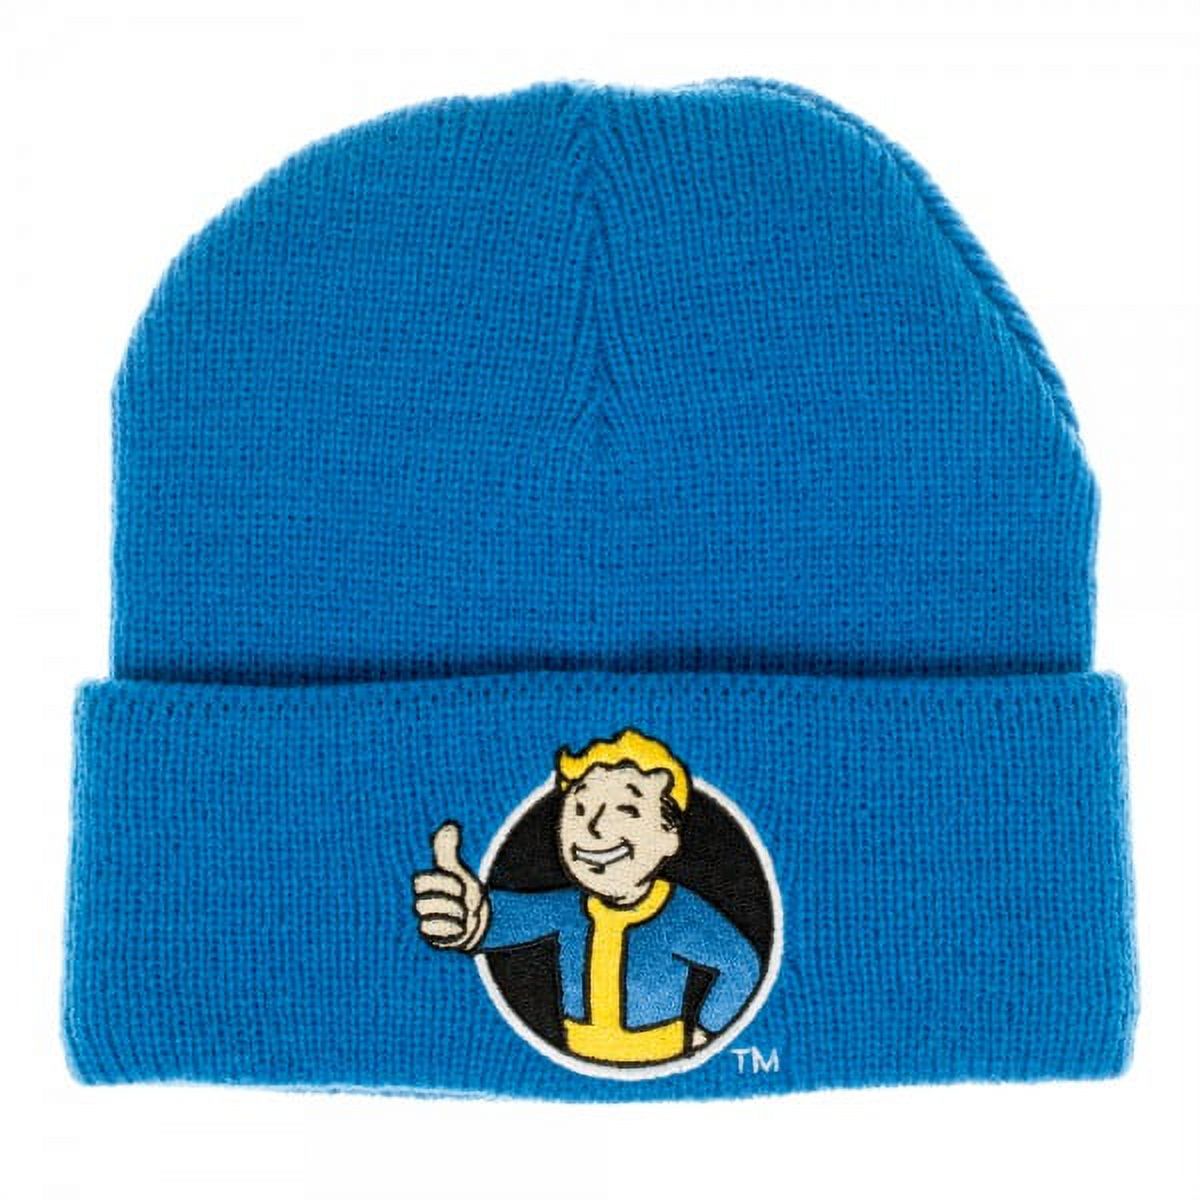 Beanie Cap - Fallout - Vault Boy Blue Single Layer Cuff New Licensed kc4195fot - image 1 of 2